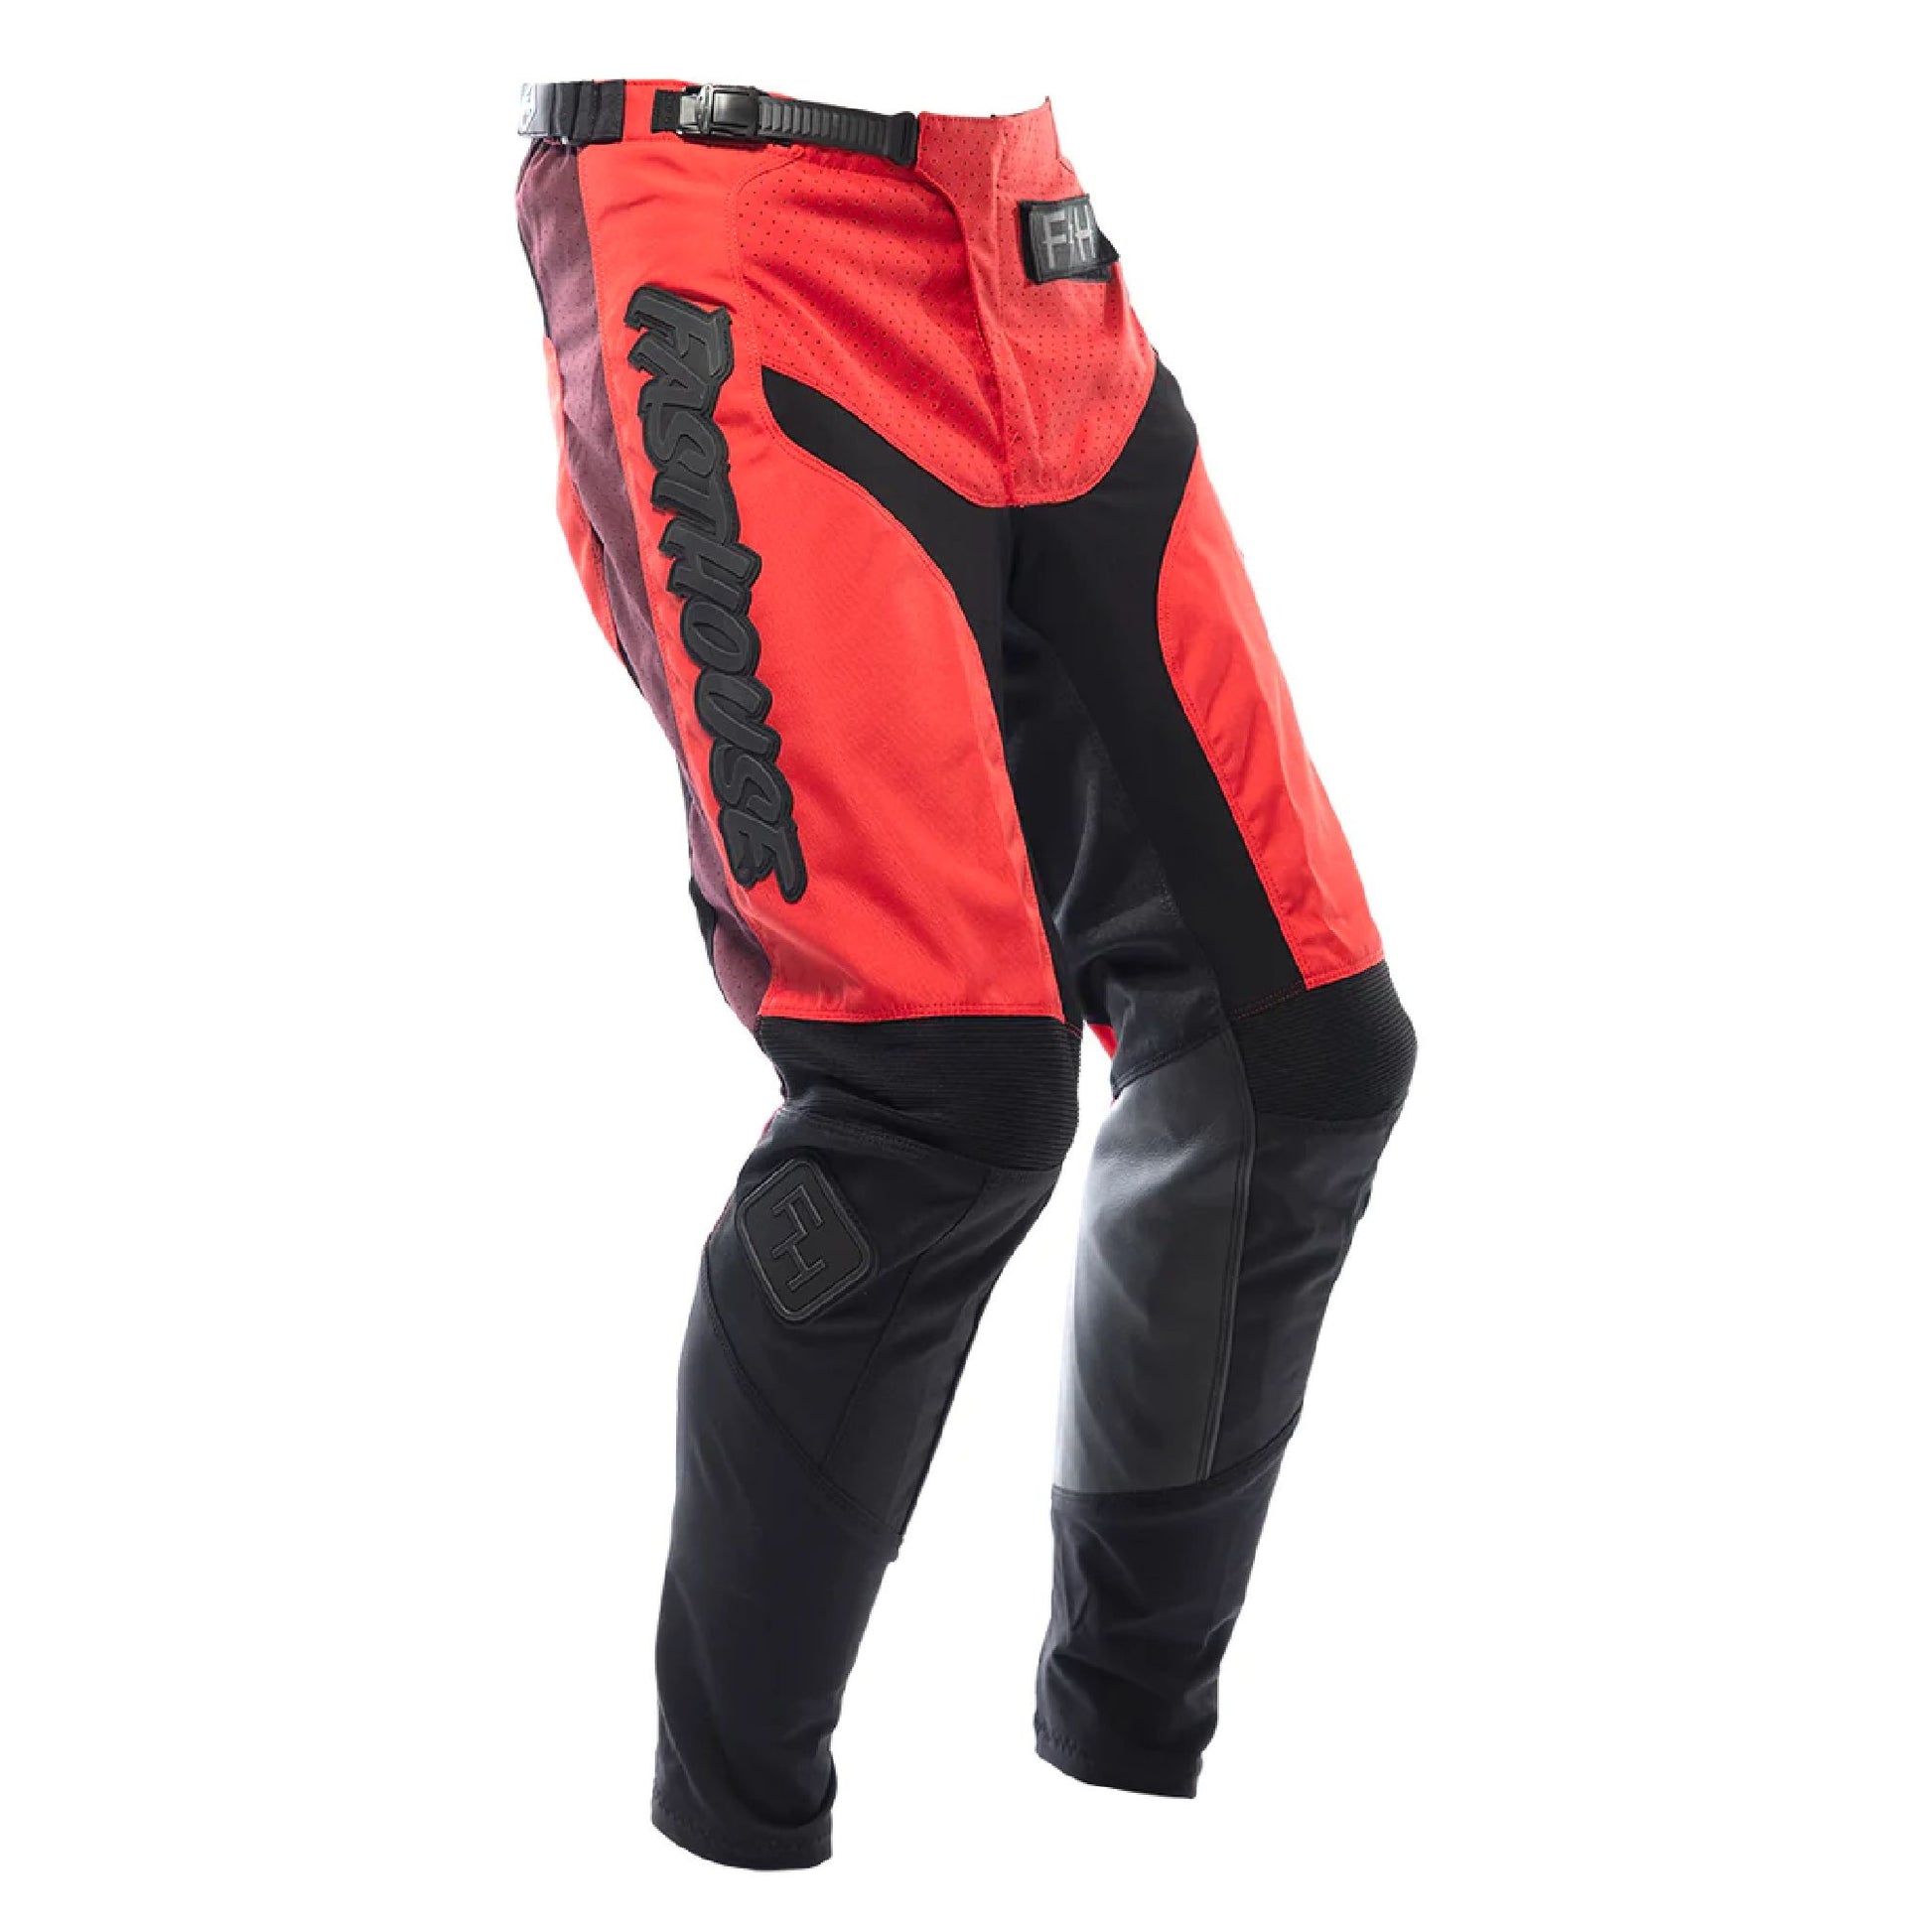 Fasthouse Grindhouse Pants Red Black Bike Pants